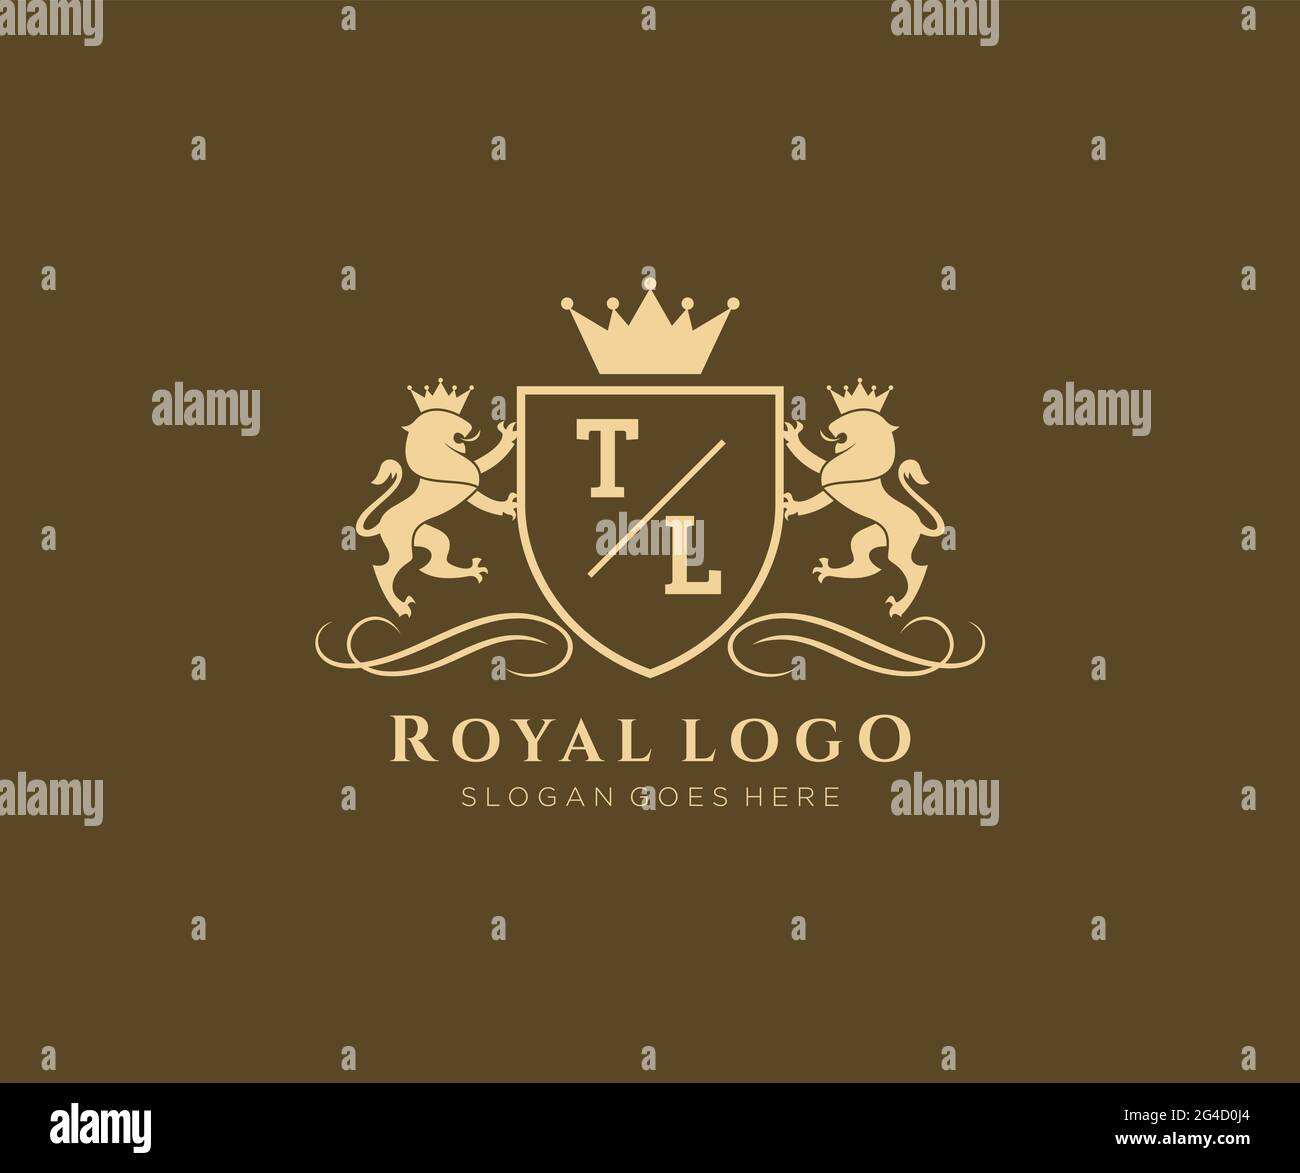 TL Letter Lion Royal Luxury Heraldic,Crest Logo template in vector art for Restaurant, Royalty, Boutique, Cafe, Hotel, Heraldic, Jewelry, Fashion and Stock Vector